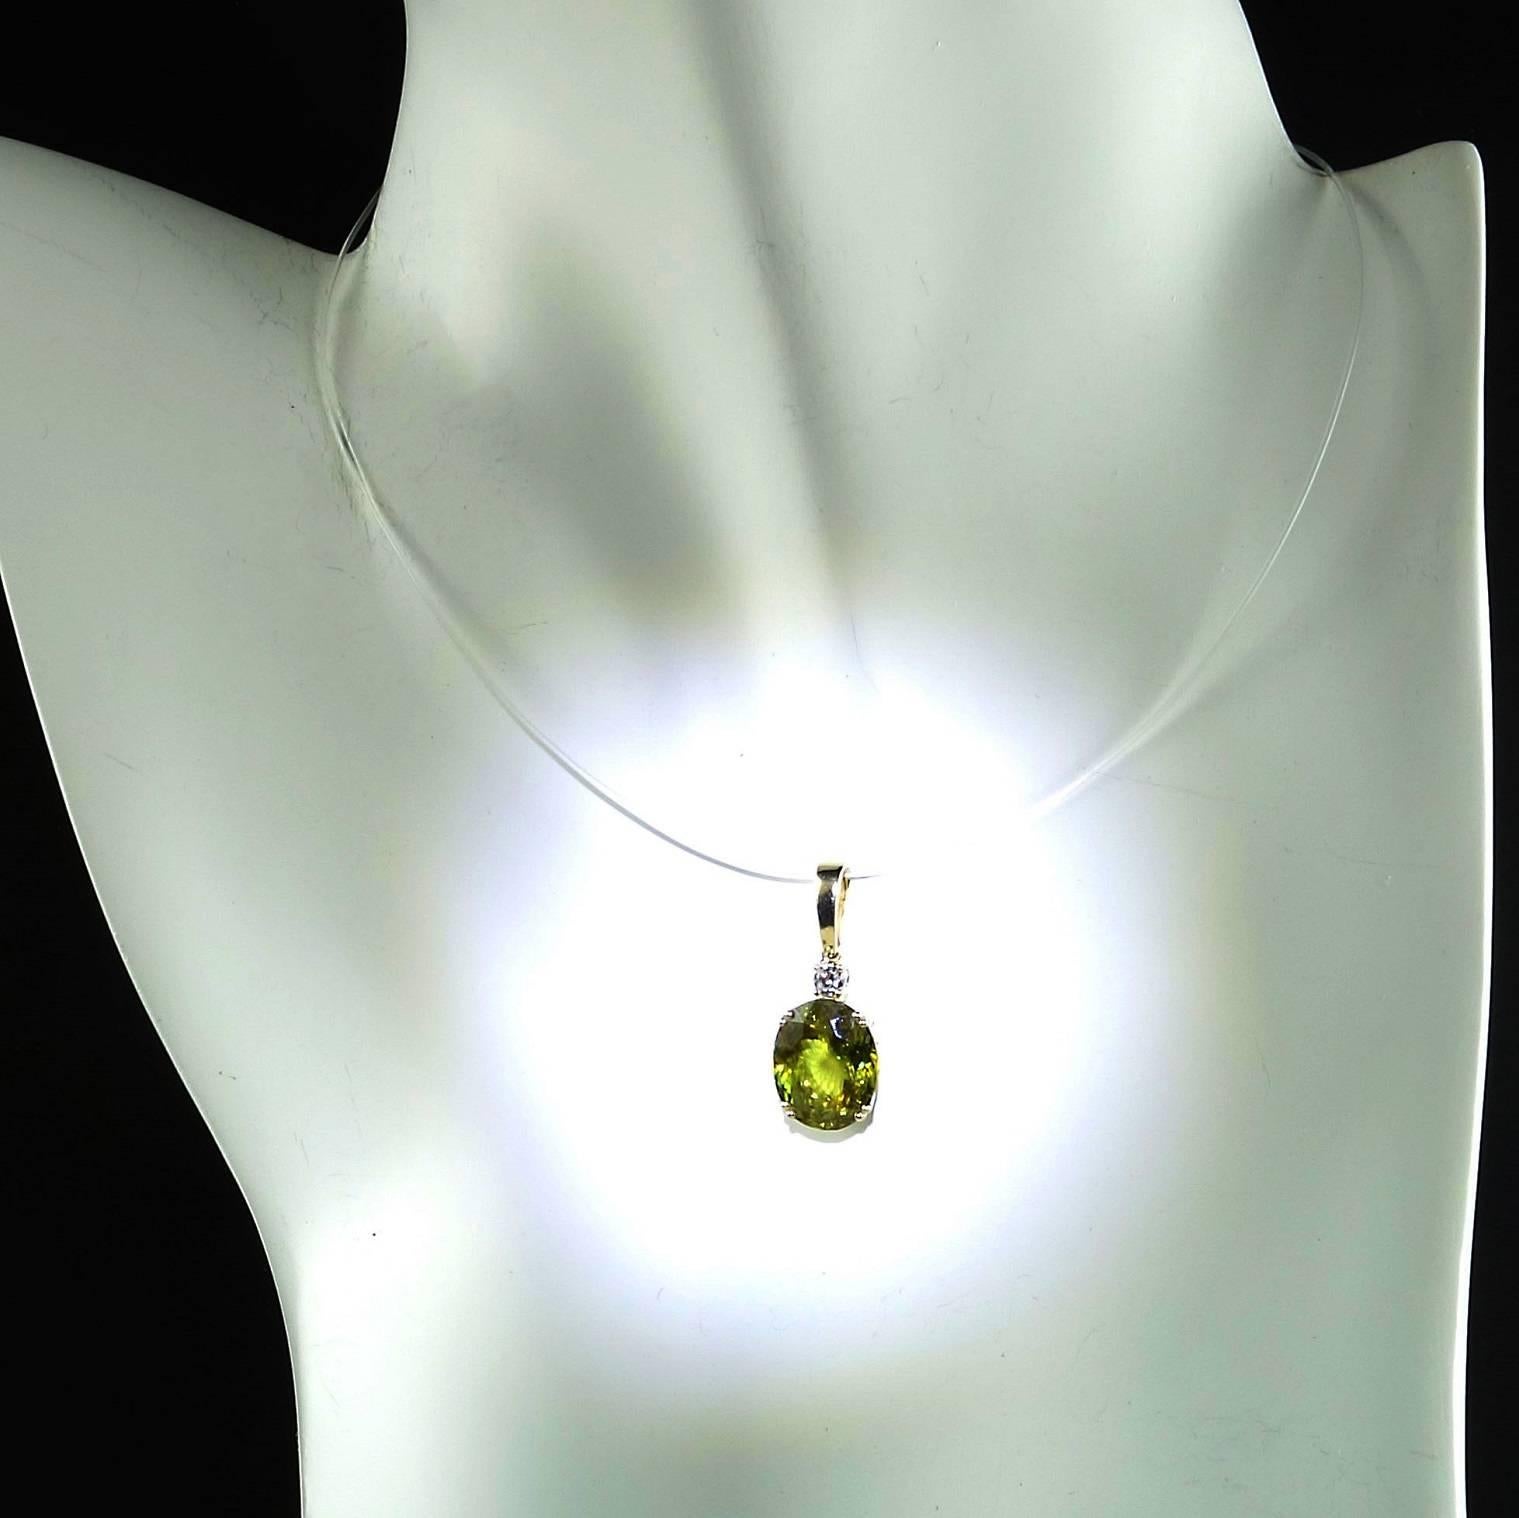 Custom made sparkling, brilliant oval Sphene Pendant with a diamond accent. This lovely green sphene is MORE BRILLIANT than diamond and will flash and sparkle as you move. The Sphene is 4.84 carats and it is accented with a 0.10 carat diamond. This